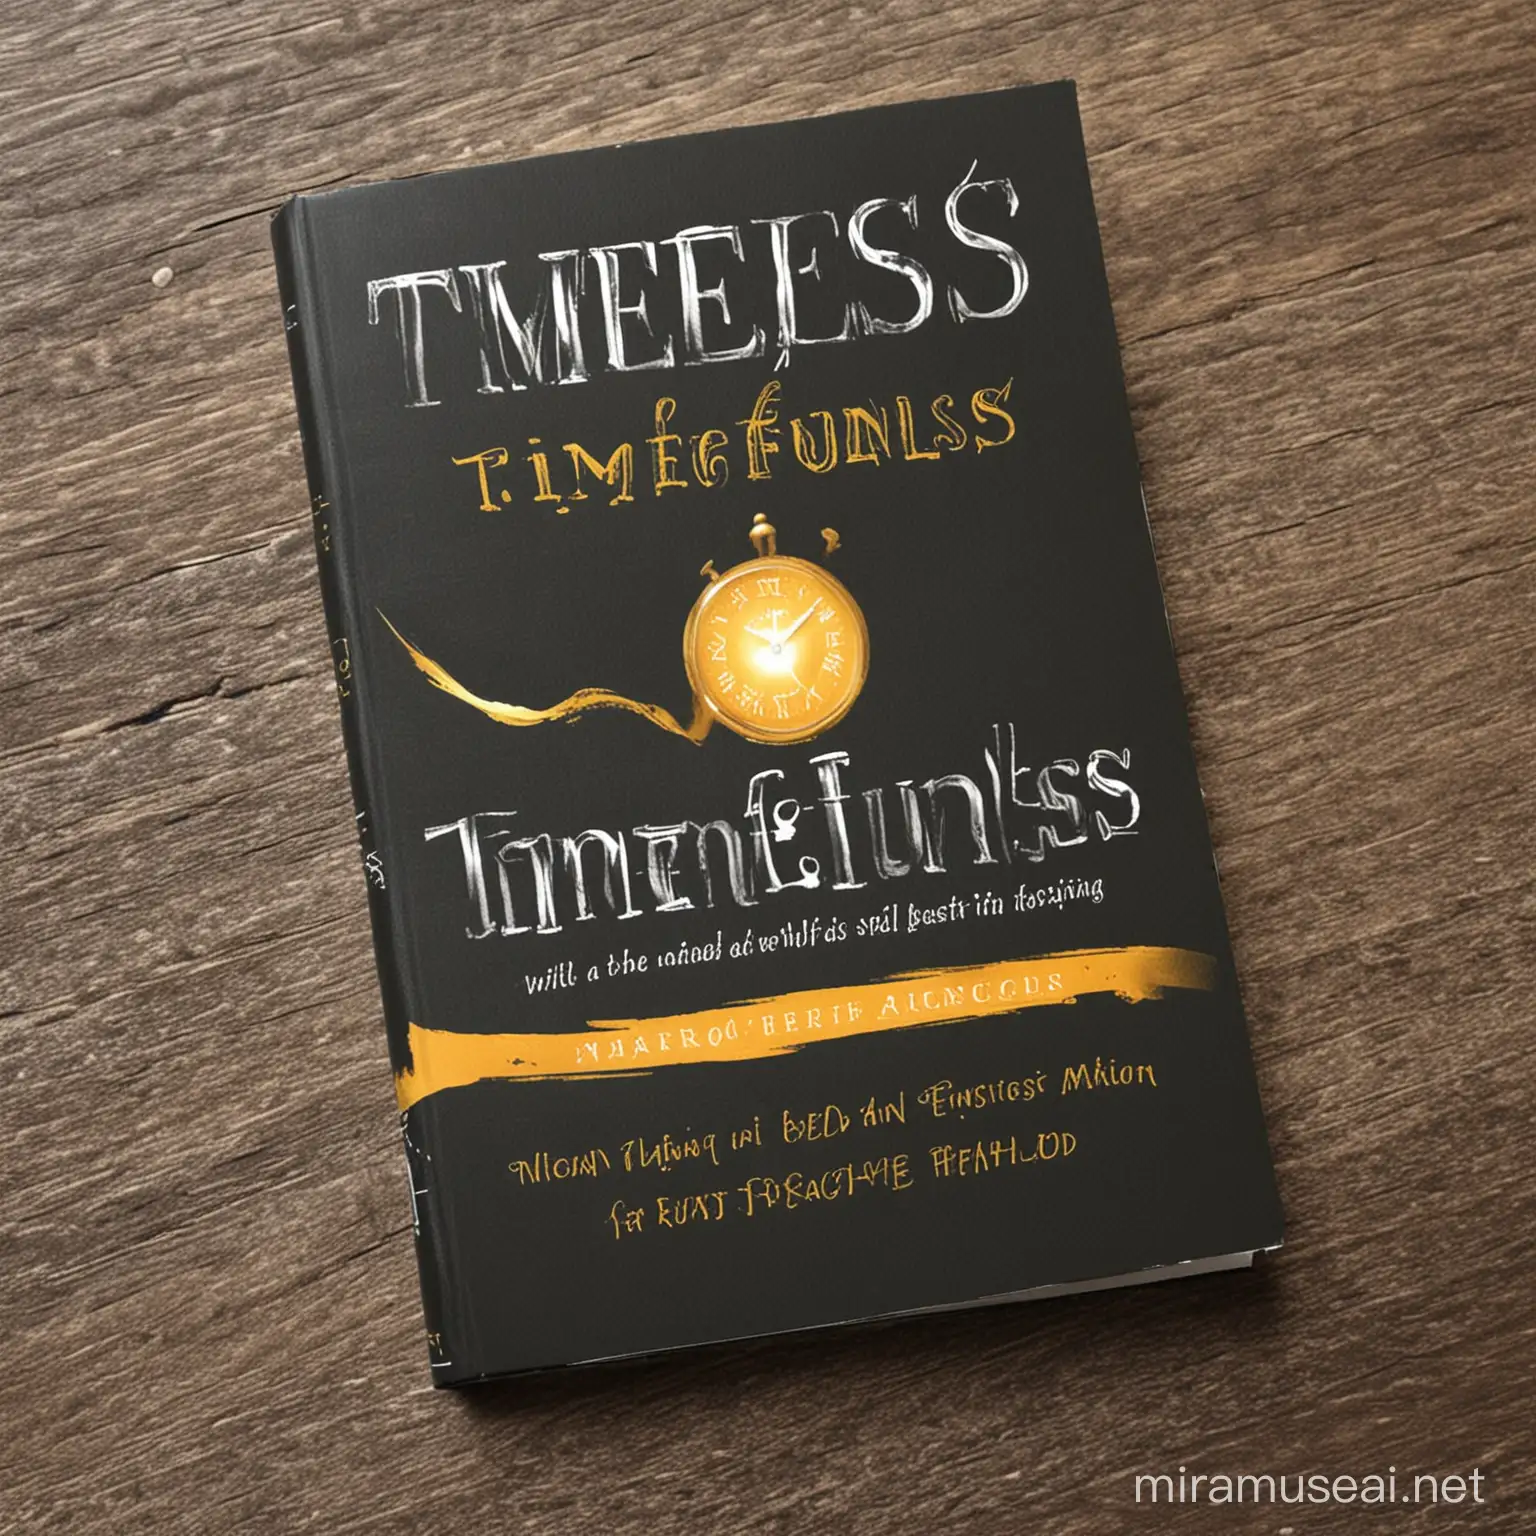 I wrote a wonderful book named "Timefulness" and I need a cover design that will maximize its chances to become a best seller in the Self-Help genre. The book is the one and only guide explaining how to become a serially successful person in multiple domains. It could be one of the best books in personal transformation, personal success and decision making.